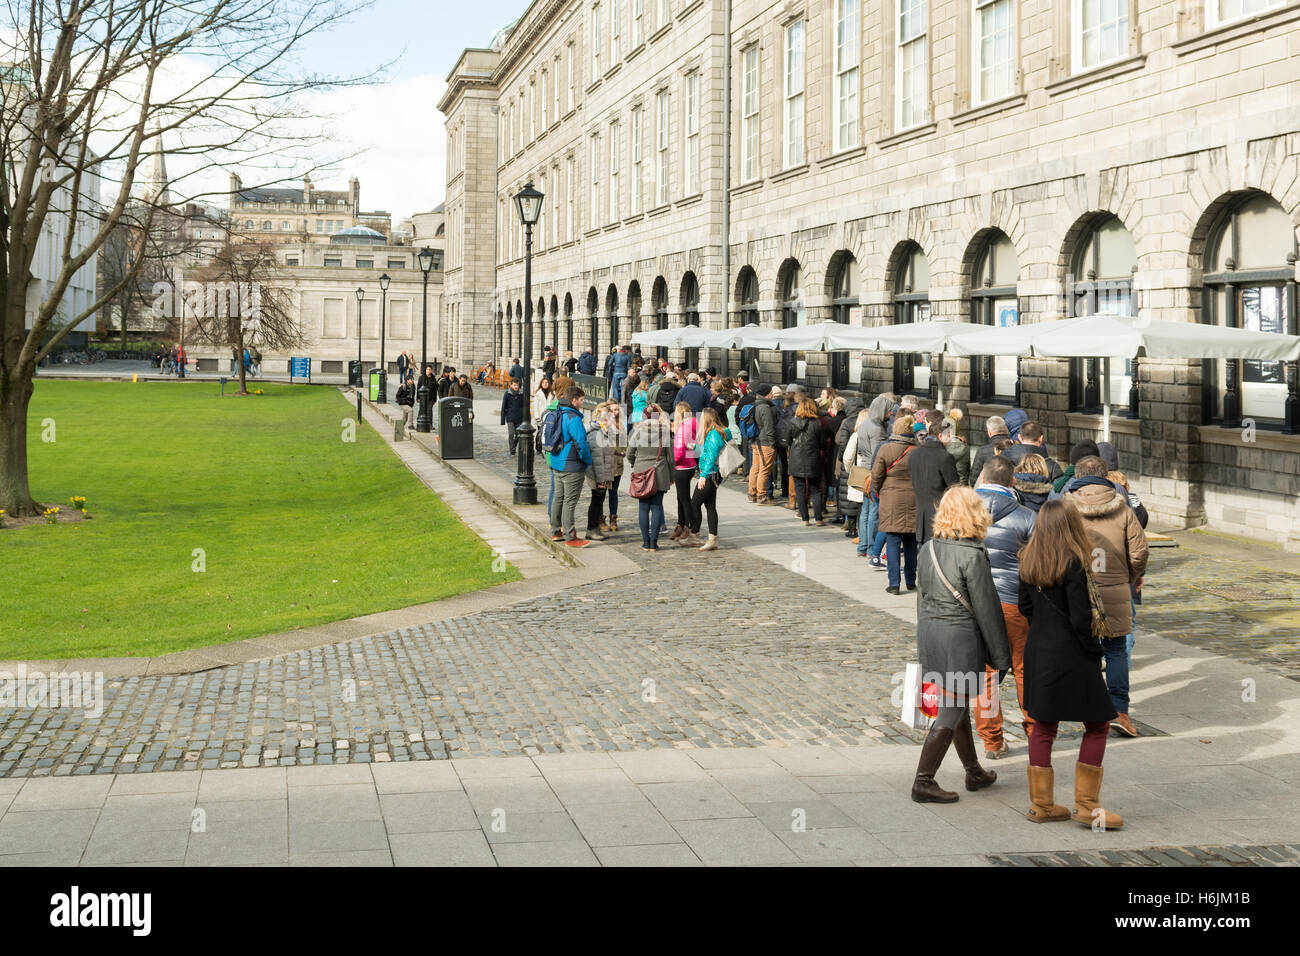 Book of Kells Exhibition queue - people queuing outside the Old Library next to Fellows' Square, Trinity College, Dublin Ireland Stock Photo